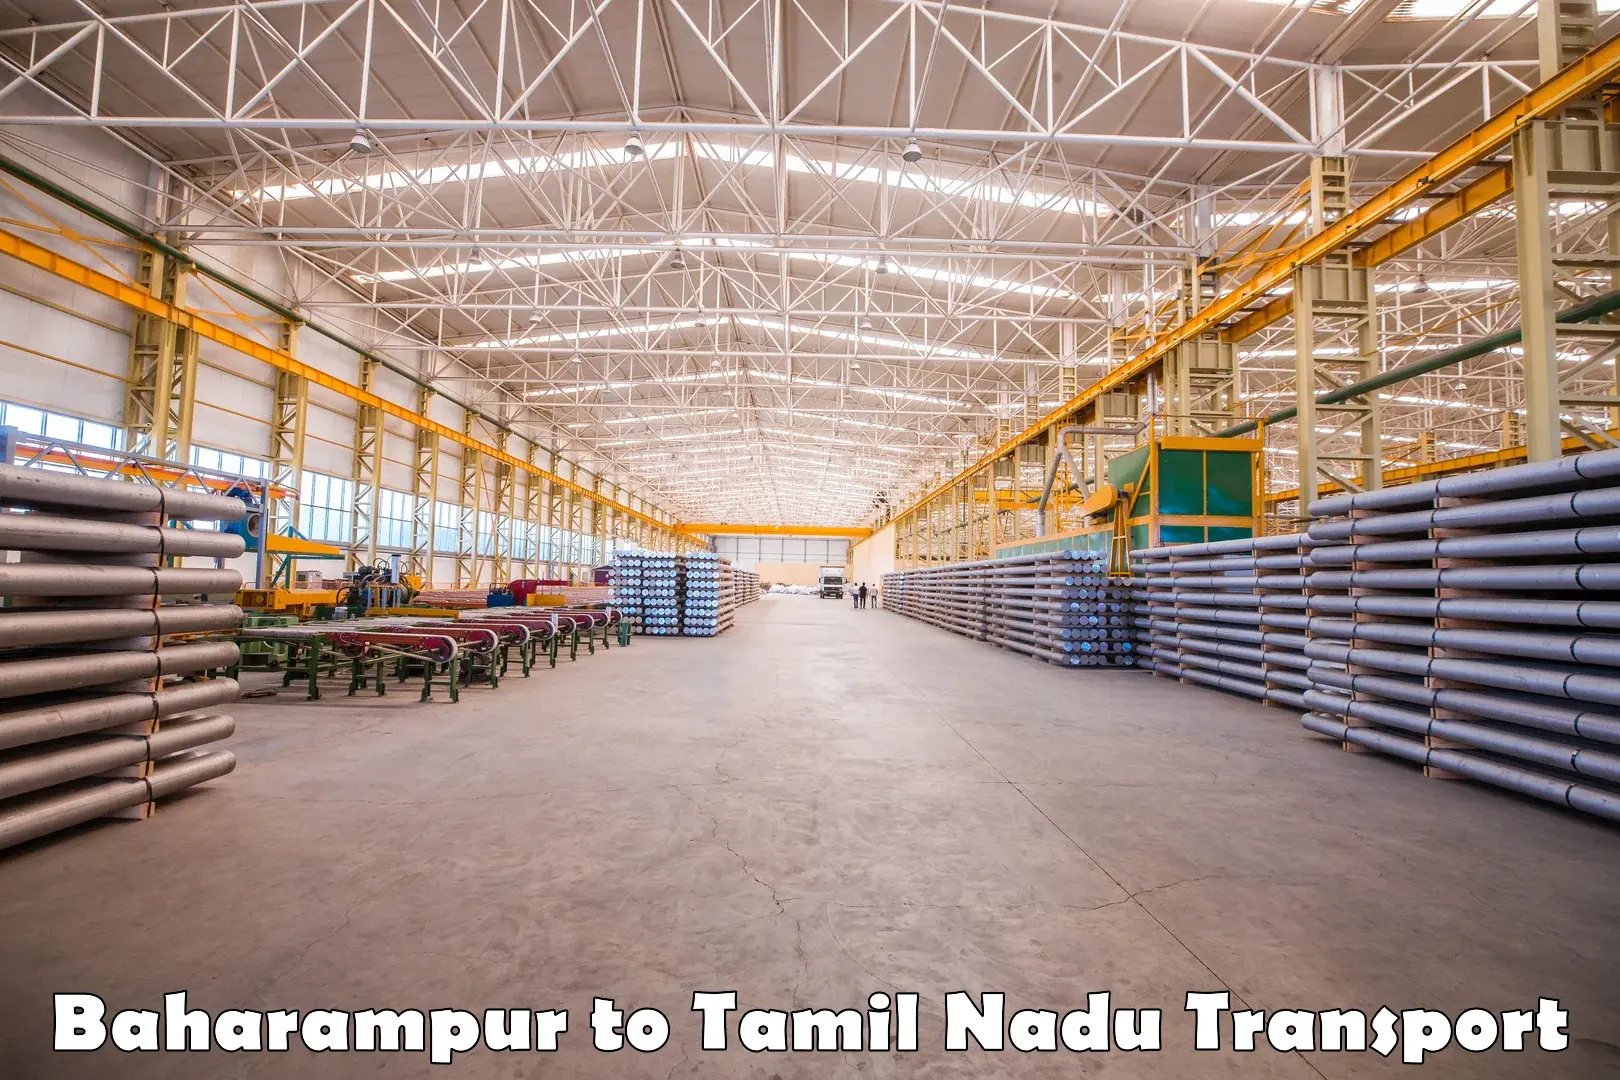 Air freight transport services Baharampur to Tamil Nadu